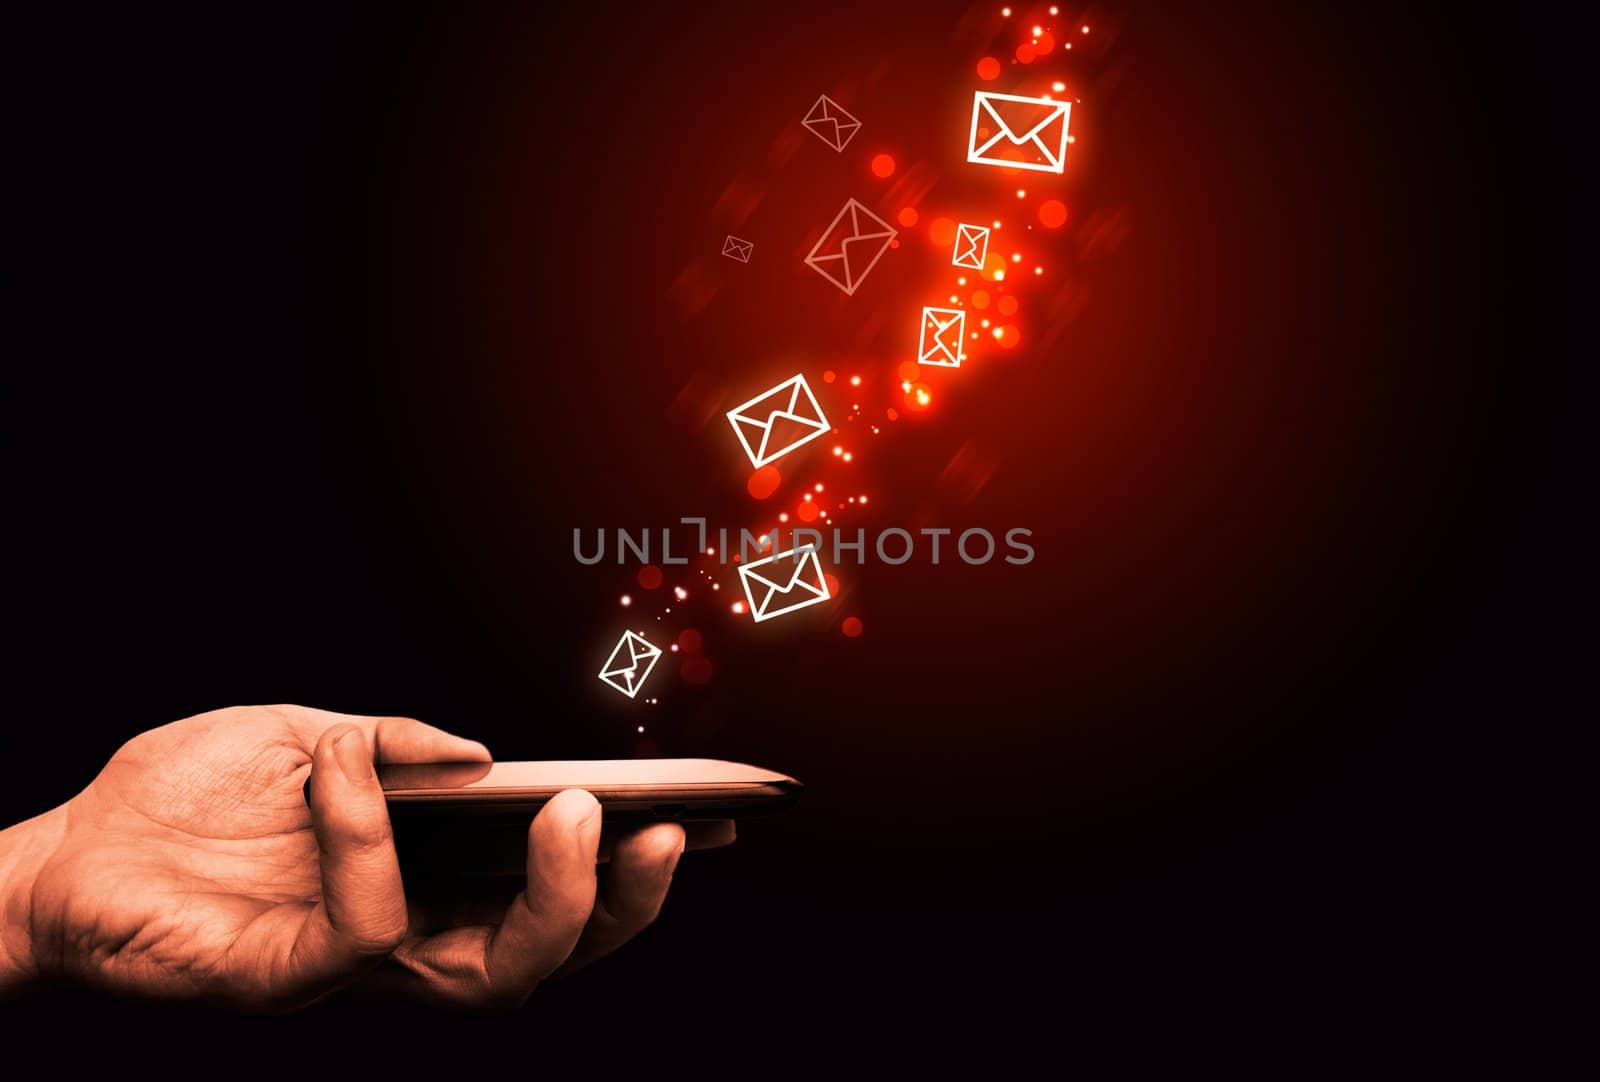 Abstract, touching mobile phone, flying envelopes, fire effect by simpson33